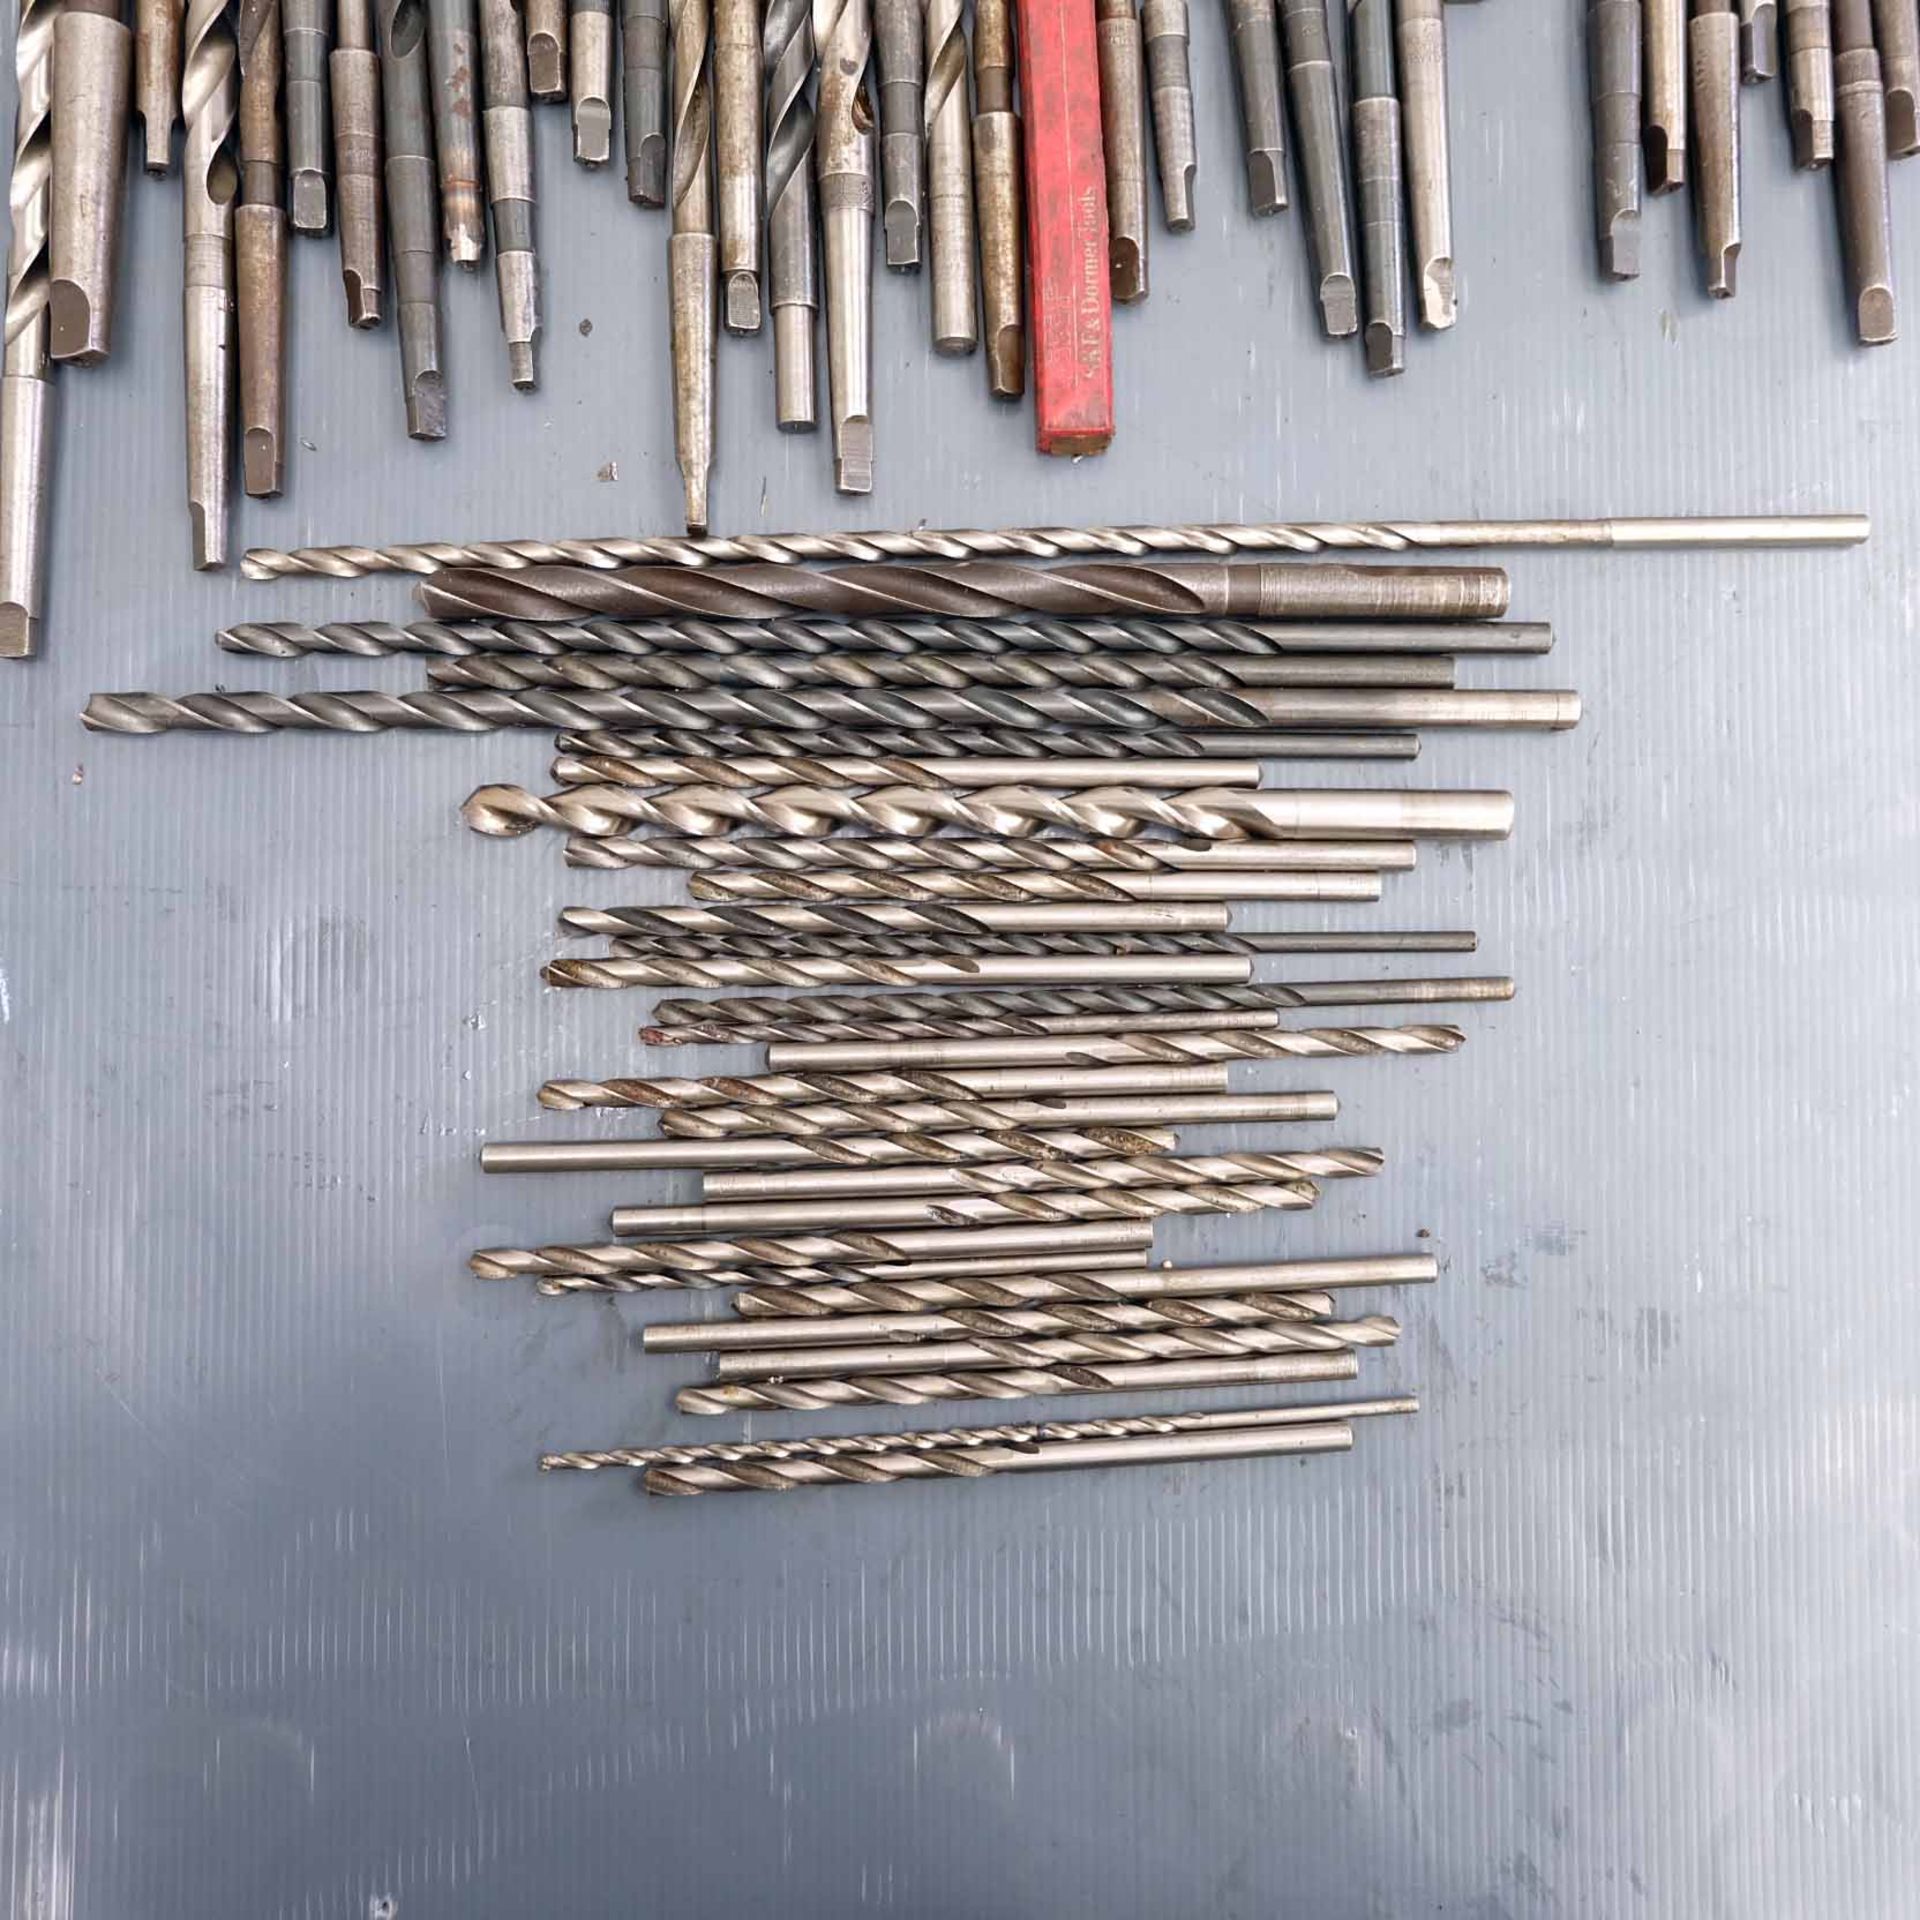 Quantity of Long Series Twist Drills. Various Imperial Sizes. 1 & 2 Morse Taper Straight Shank. - Image 4 of 4